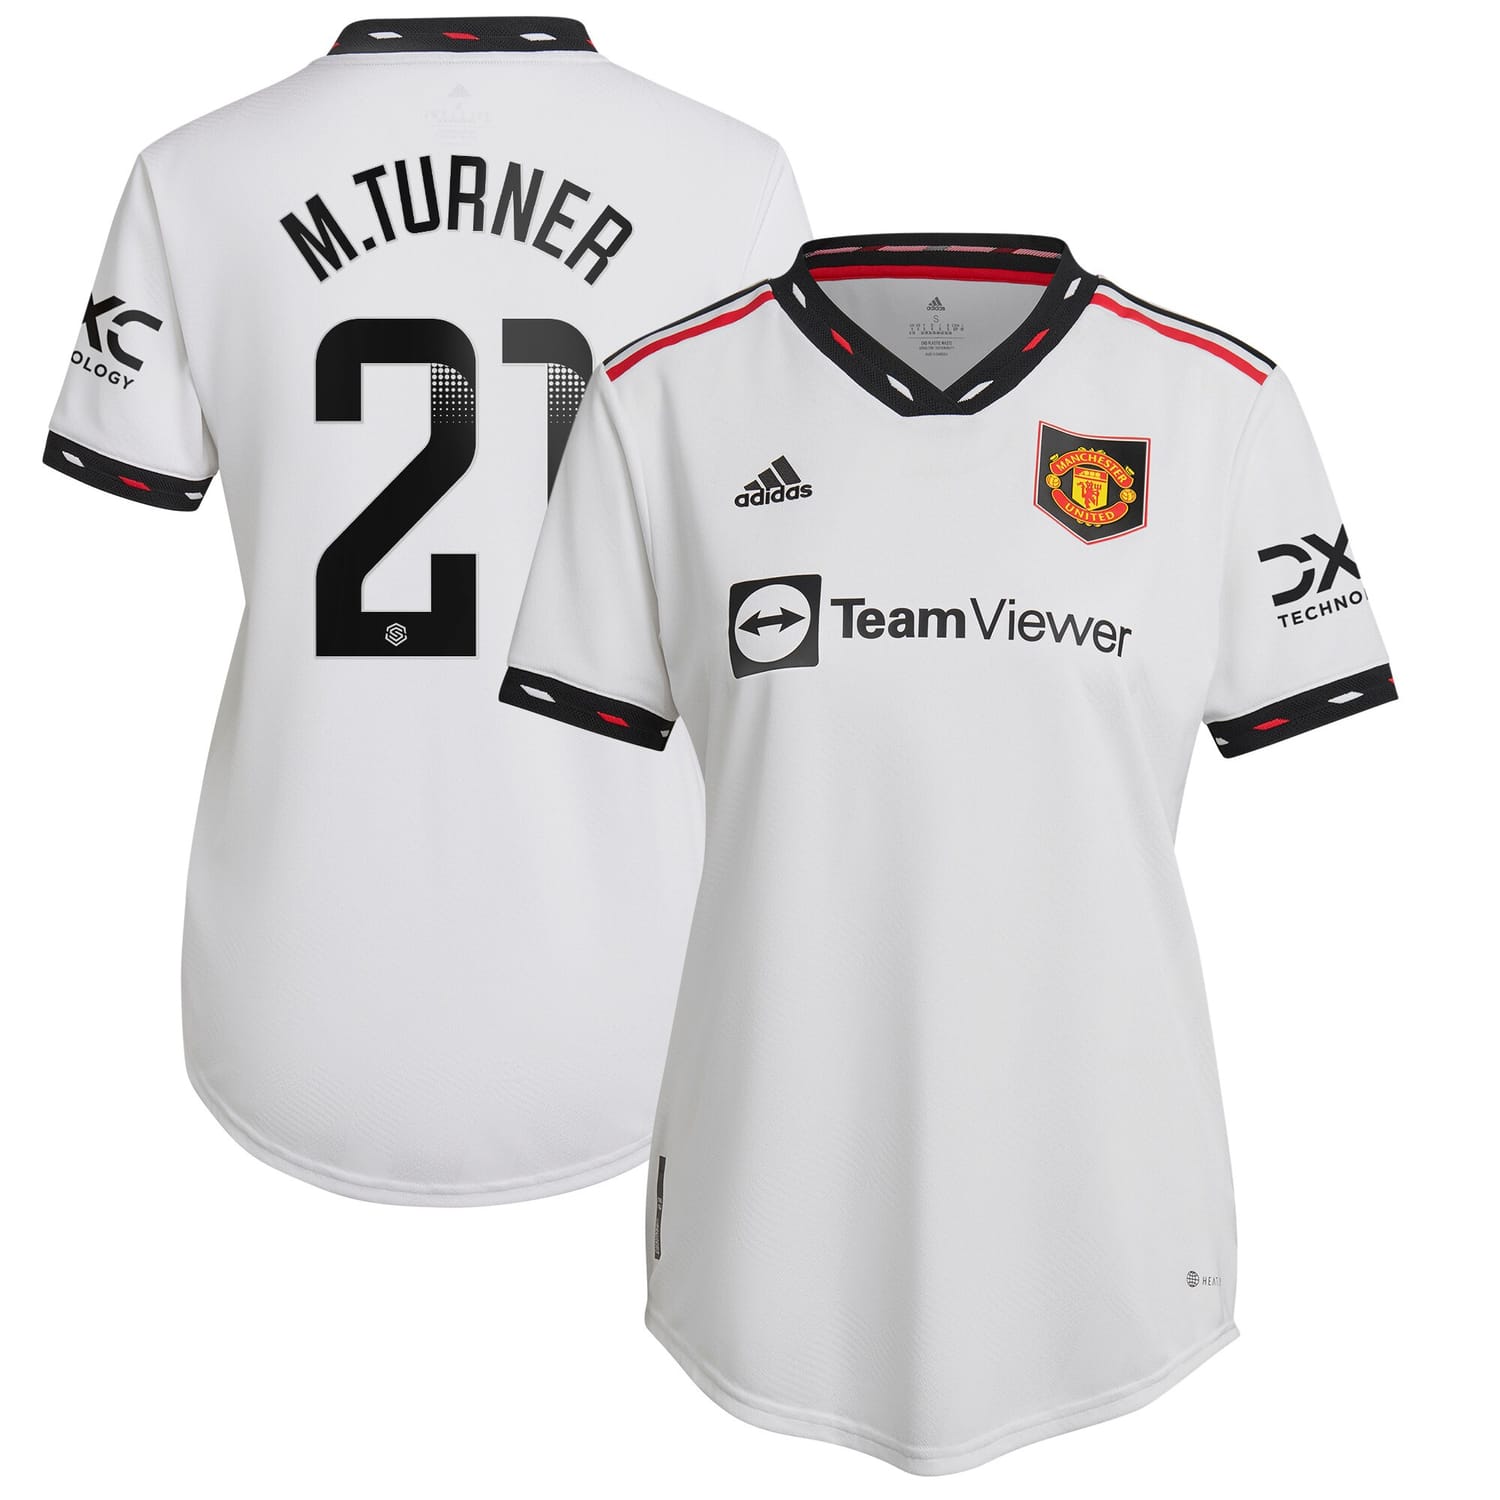 Premier League Manchester United Away WSL Authentic Jersey Shirt 2022-23 player Millie Turner 21 printing for Women